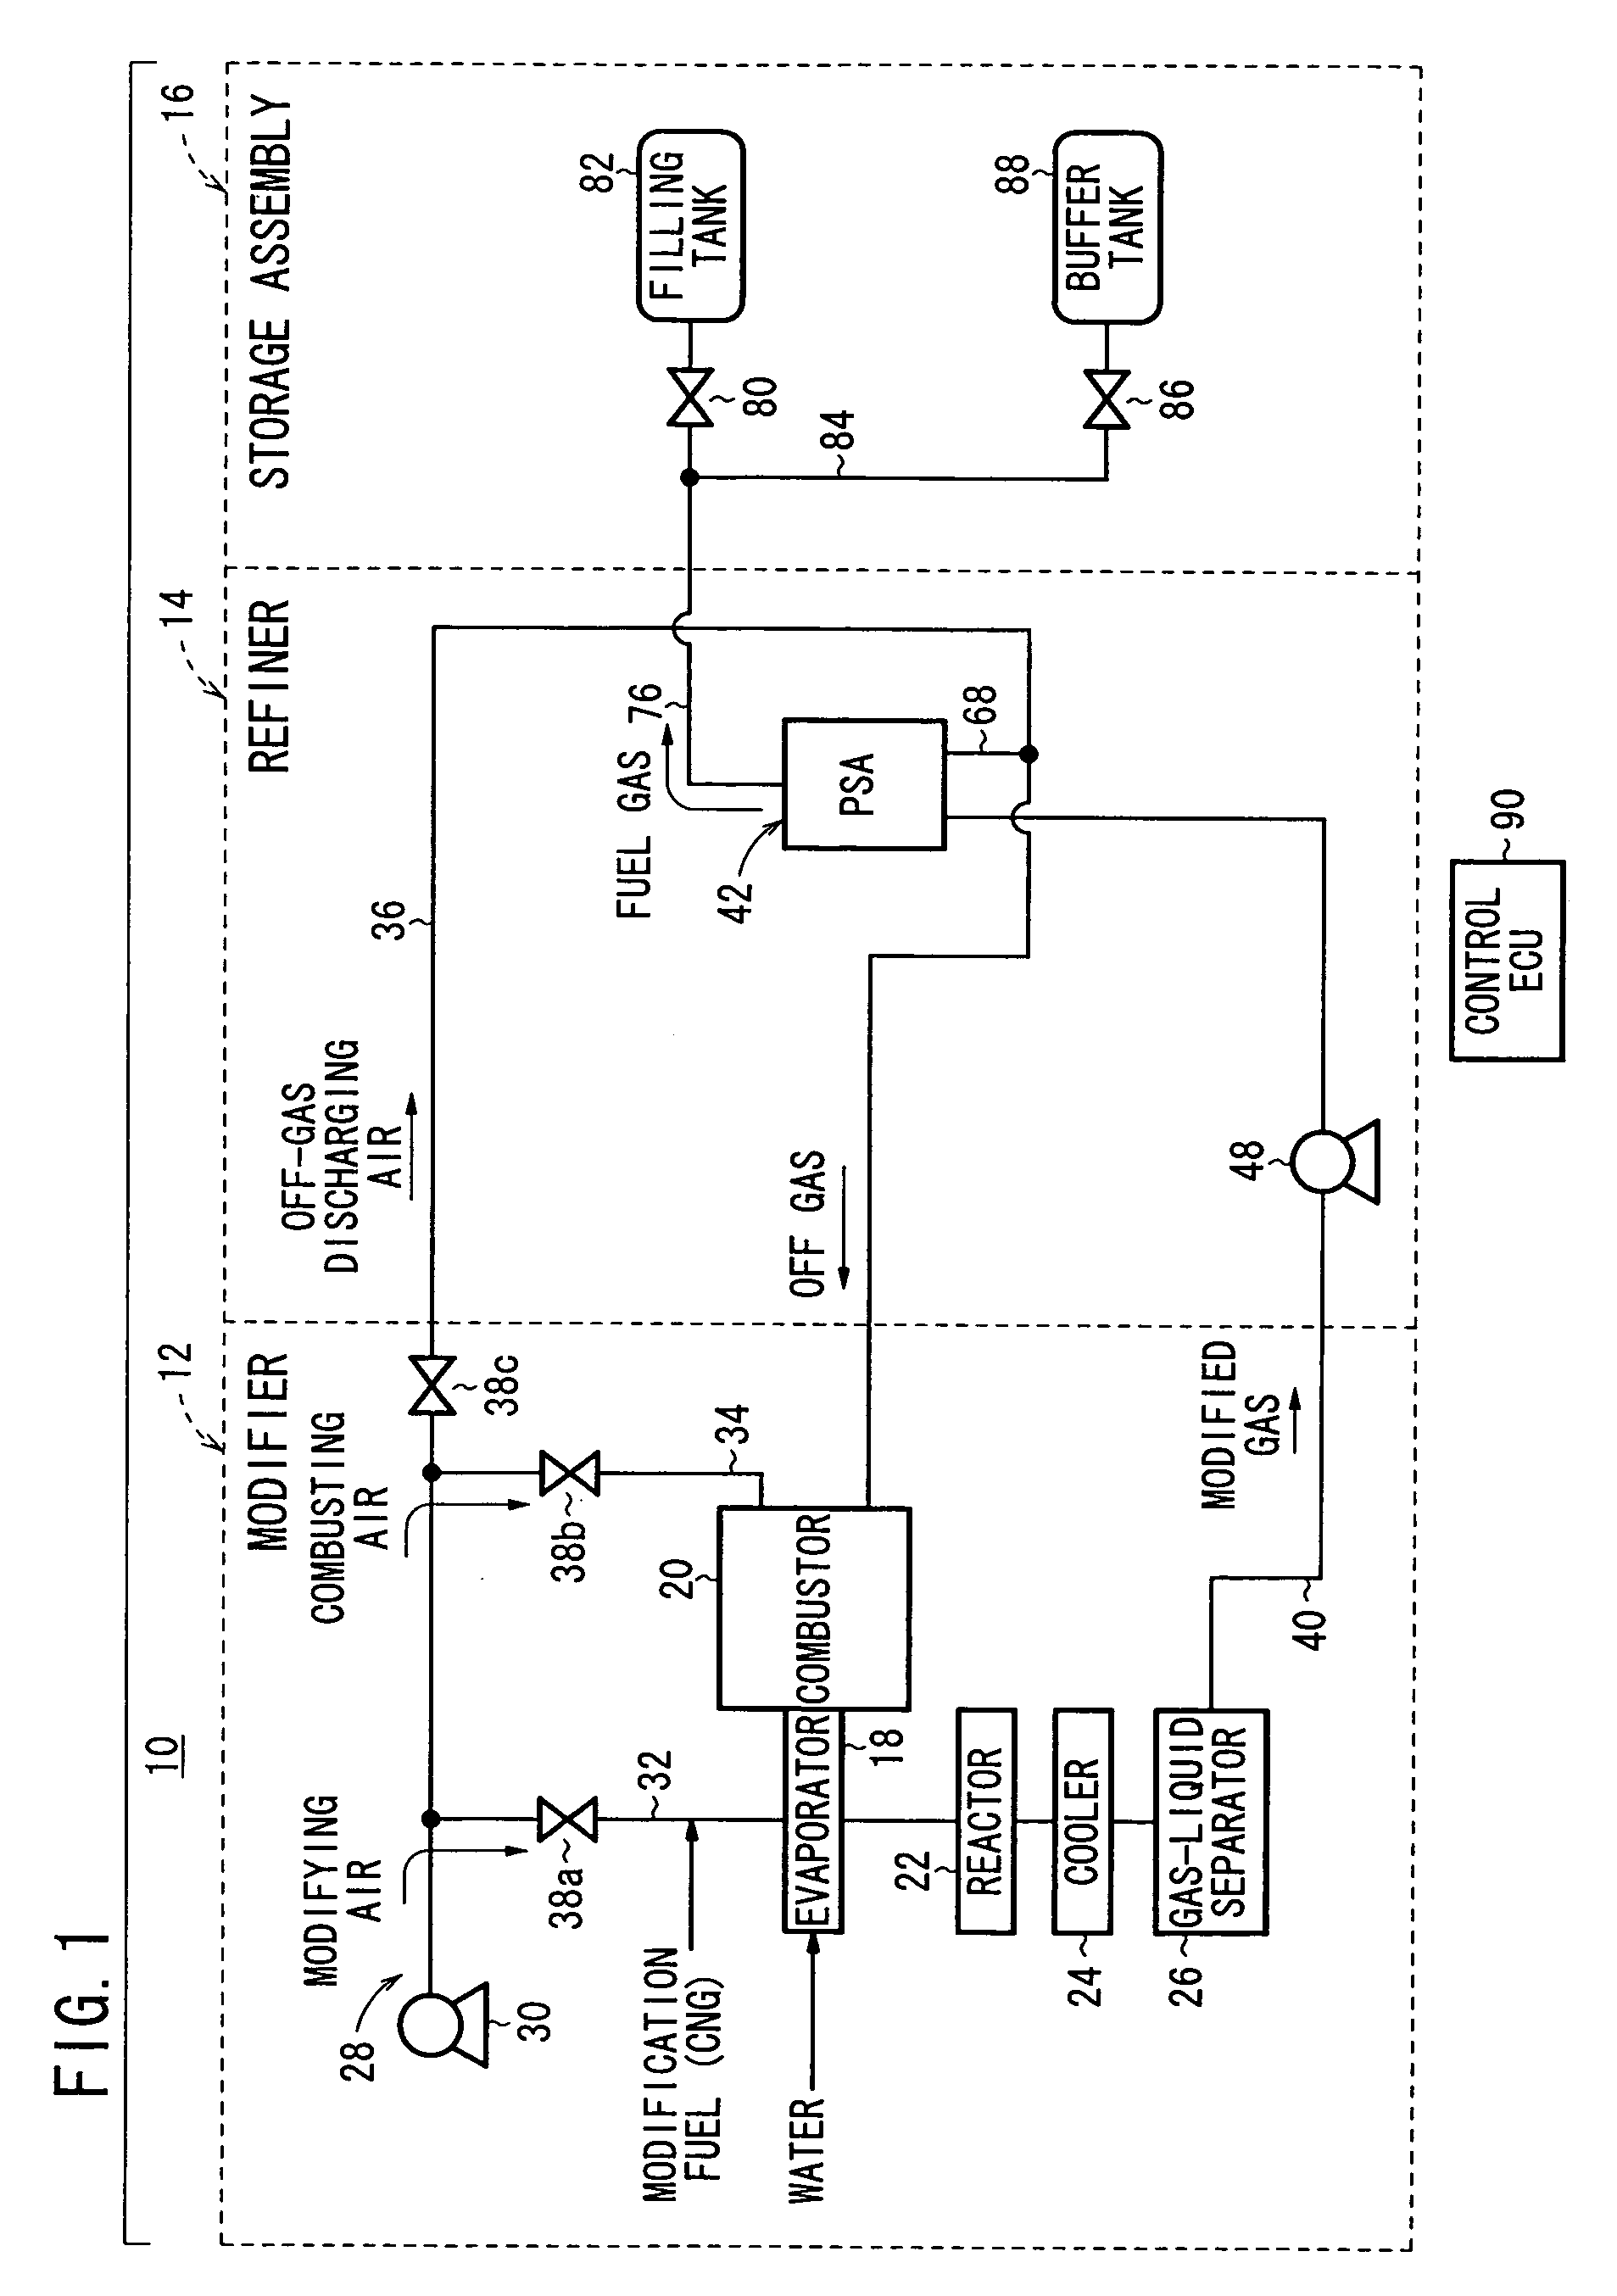 Method of shutting off fuel gas manufacturing apparatus